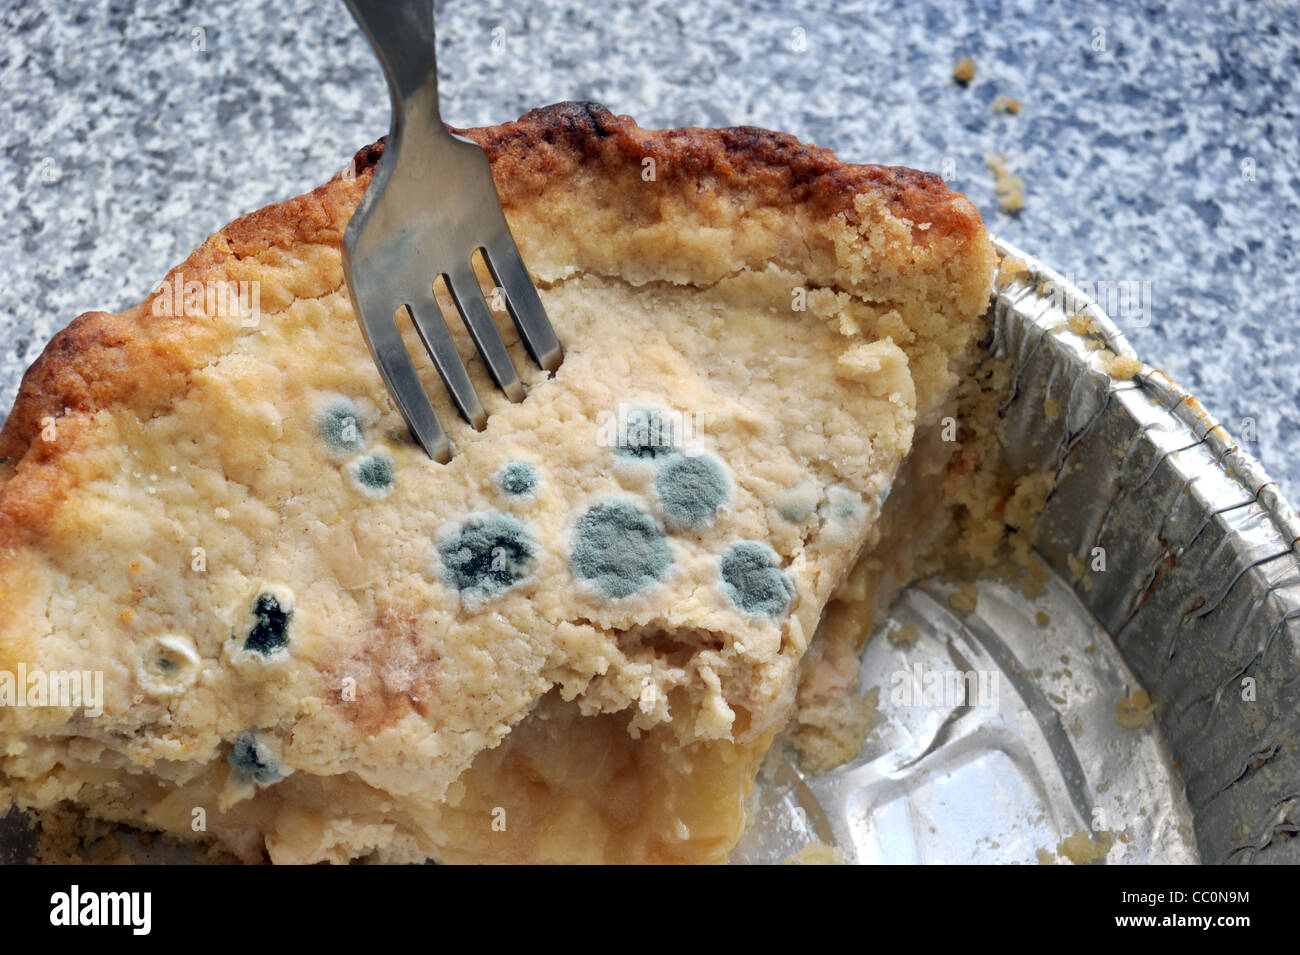 apple-pie-with-areas-of-mould-bacteria-growing-on-its-crust-re-baking-CC0N9M.jpg